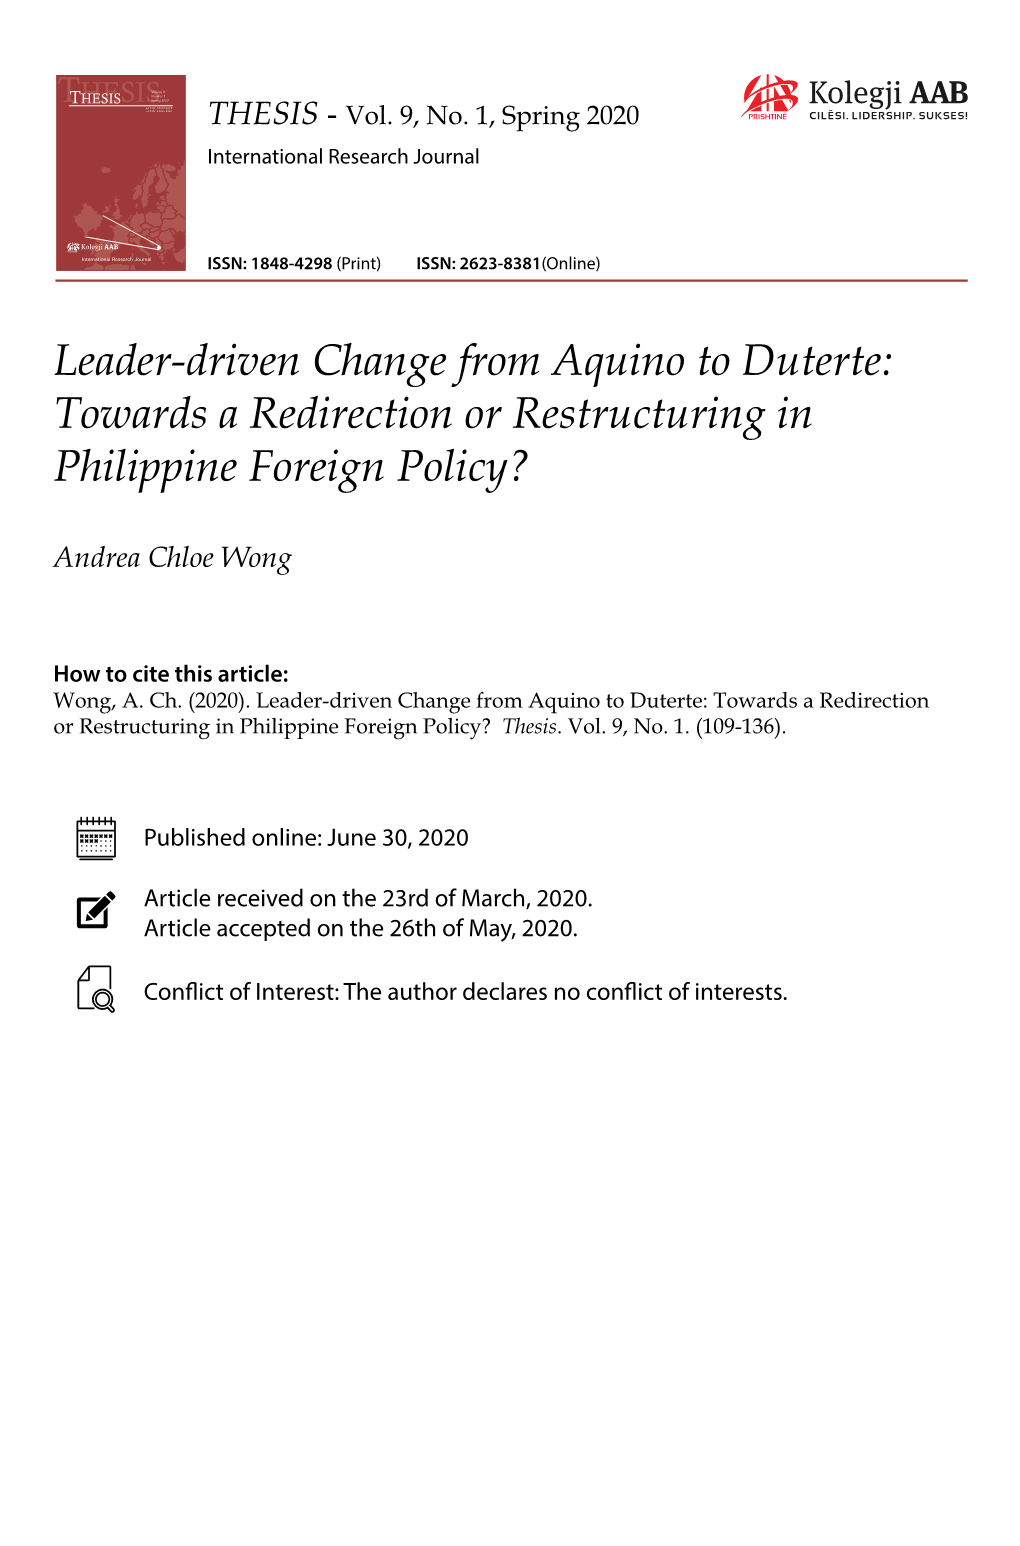 Towards a Redirection Or Restructuring in Philippine Foreign Policy?